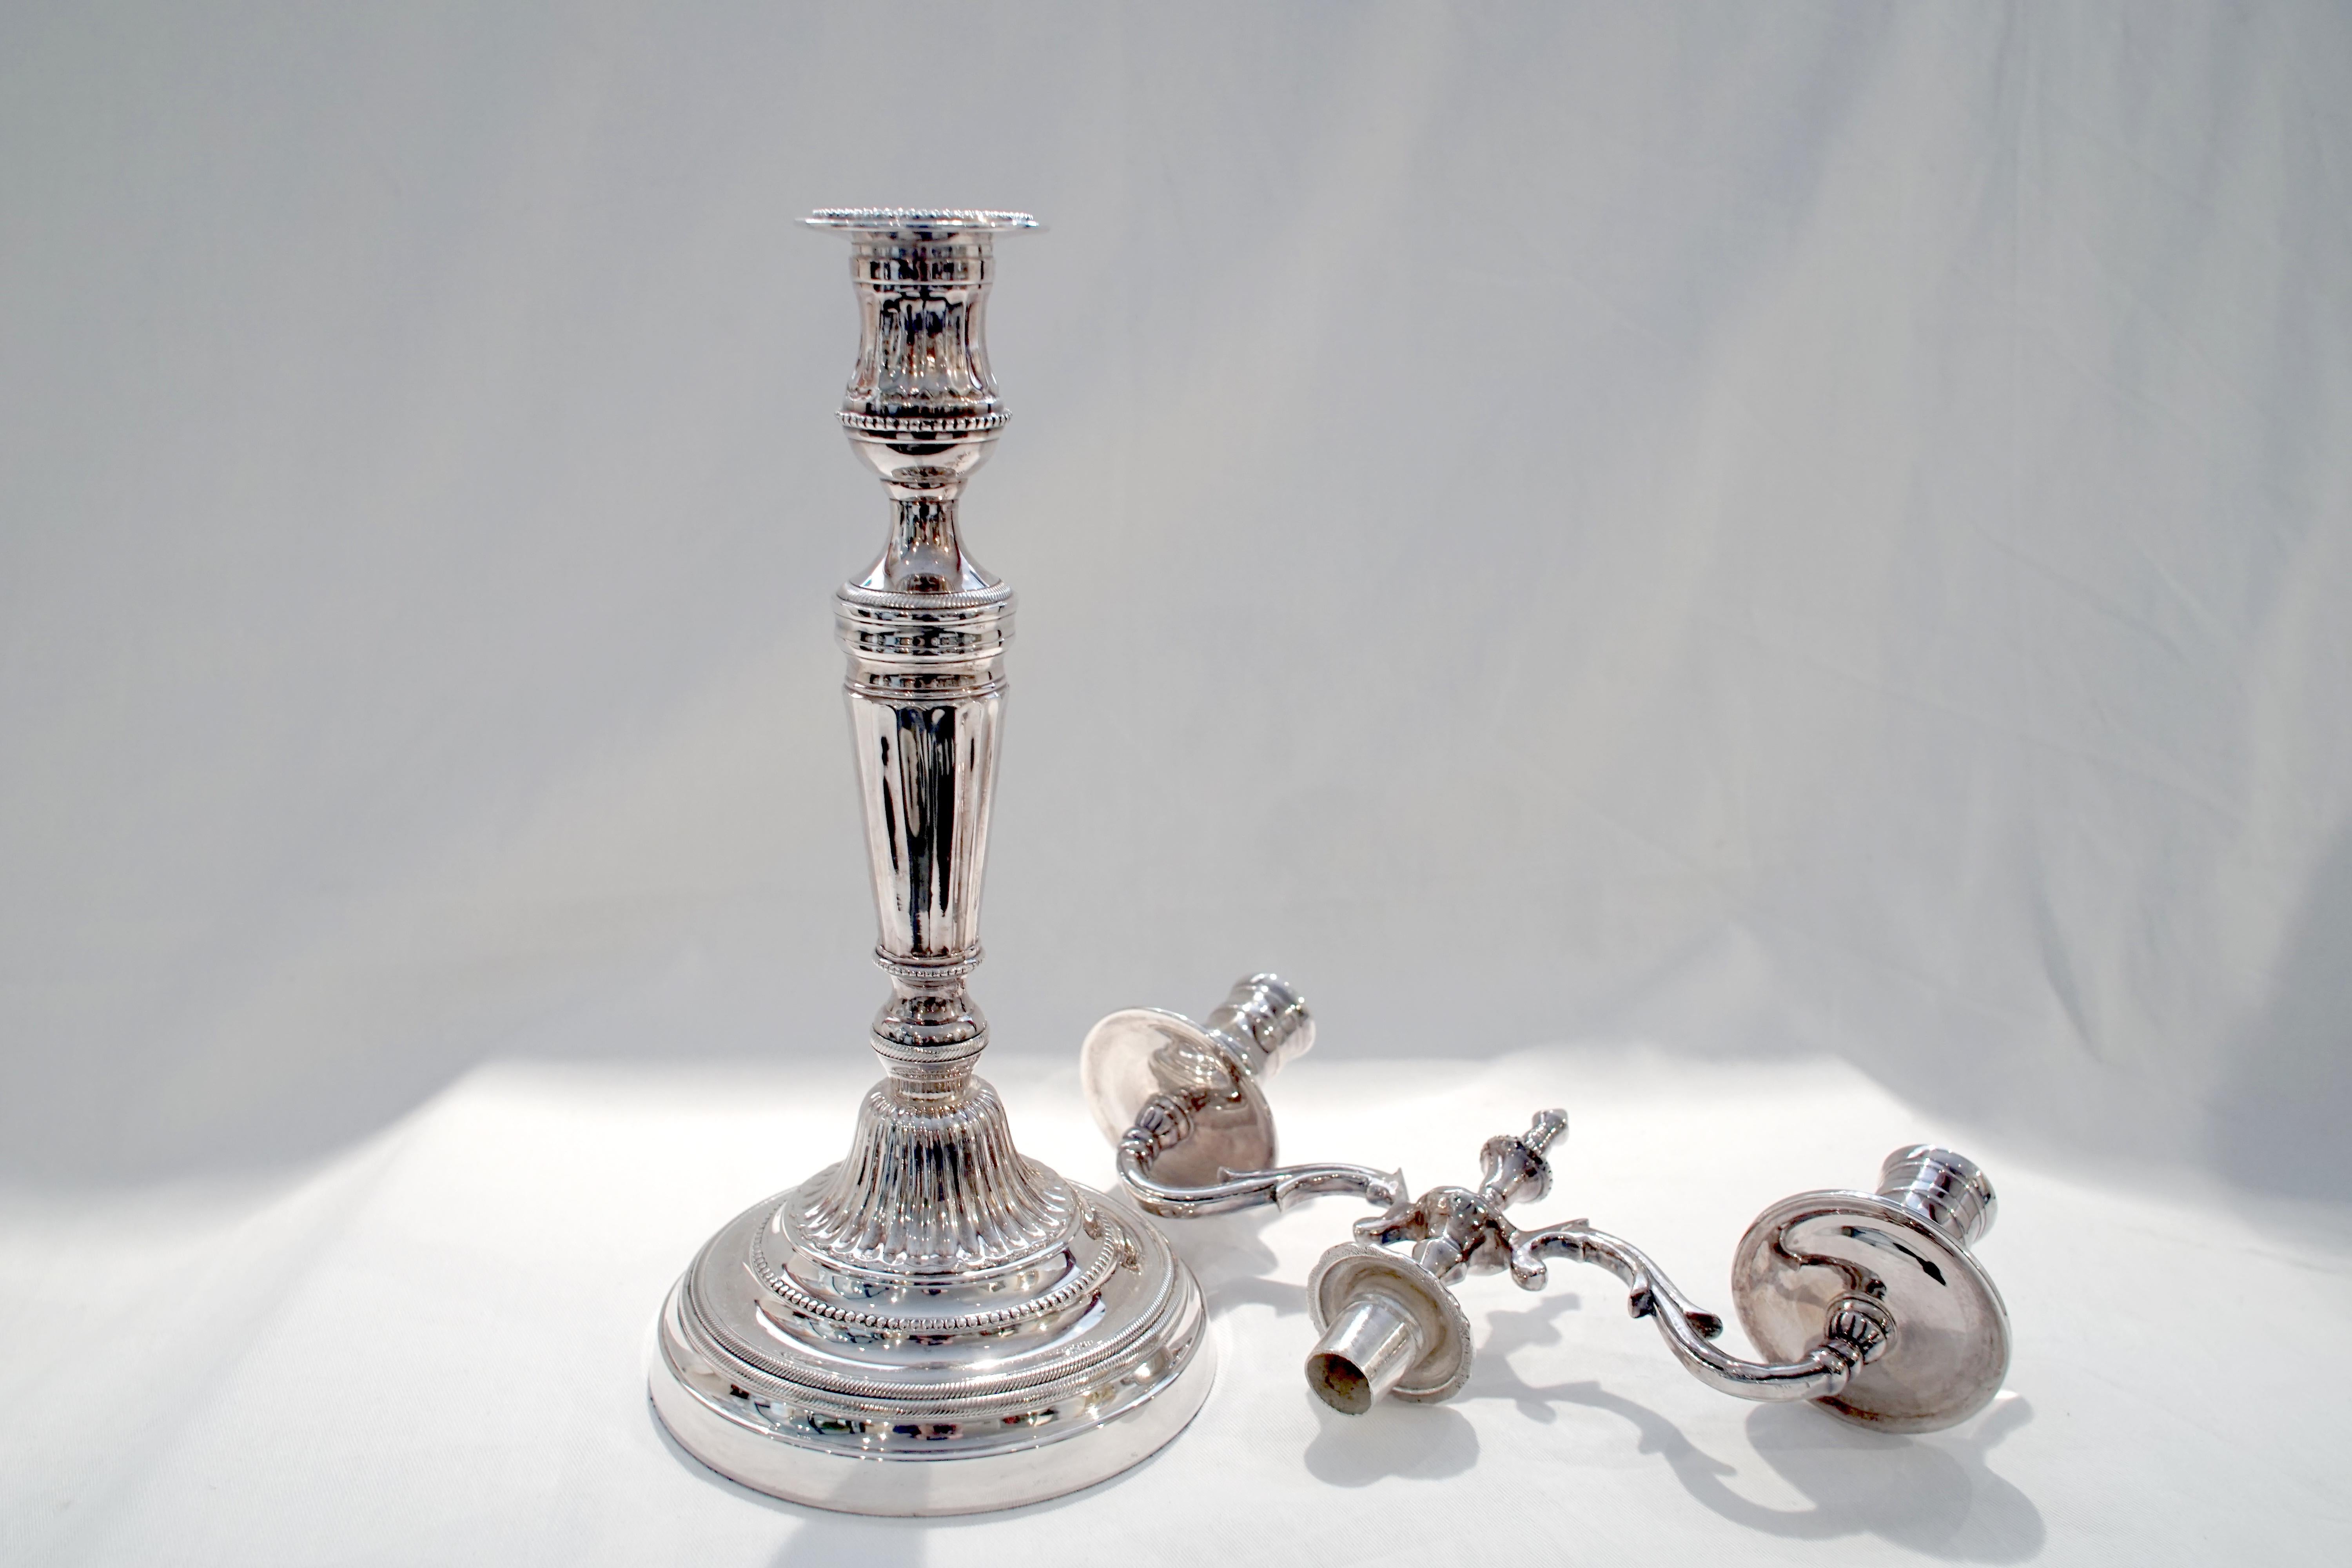 Double branched silver candlestick

Dimensions: 15.5” H x 10.5” W x 5.5” D
Base diameter 5.5”.